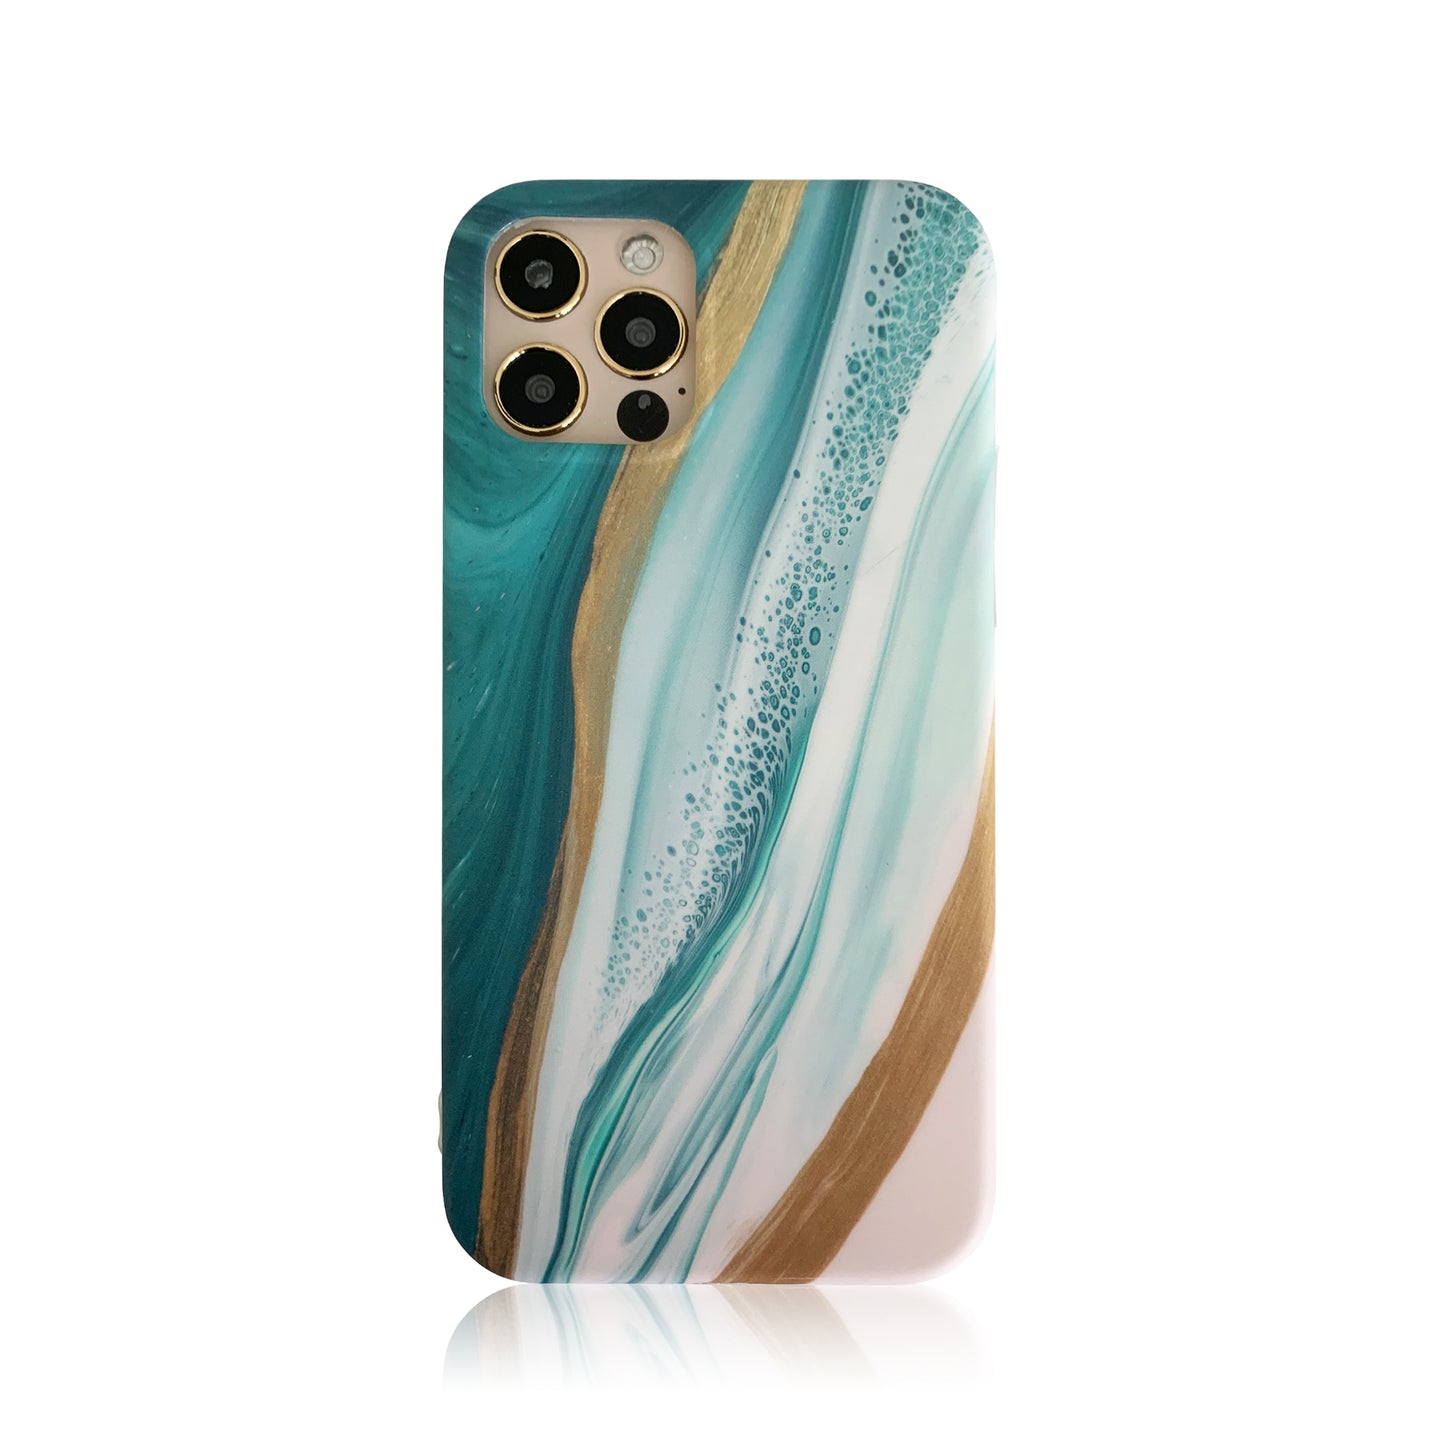 Teal and Gold iPhone Silicon Case